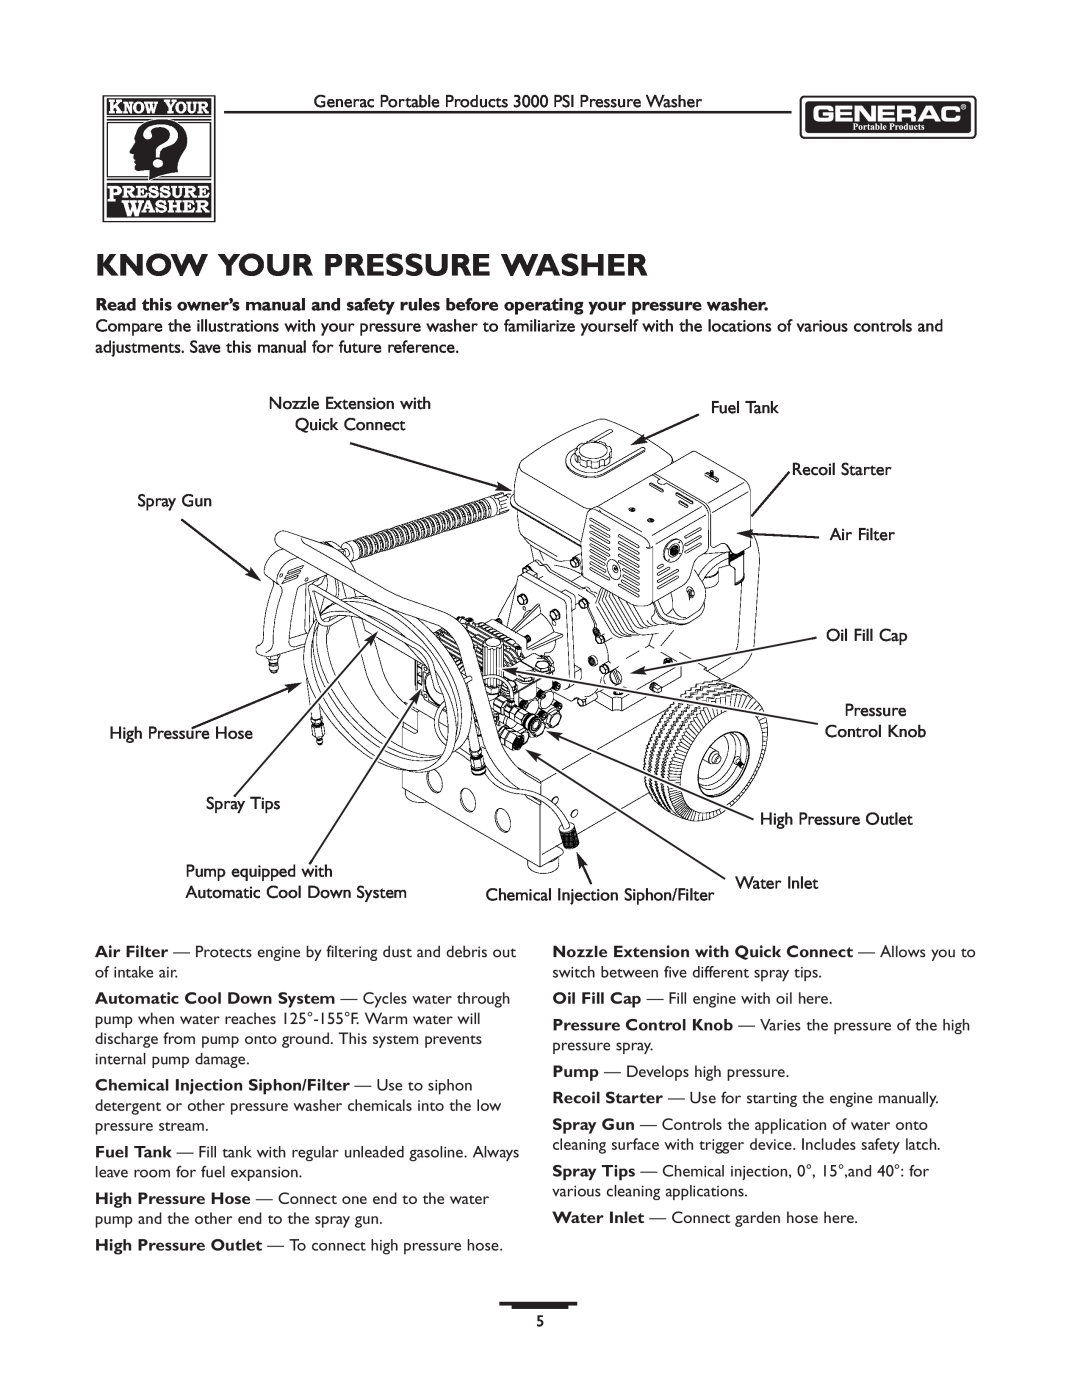 Briggs & Stratton 1418-2 owner manual Know Your Pressure Washer, Nozzle Extension with Quick Connect - Allows you to 